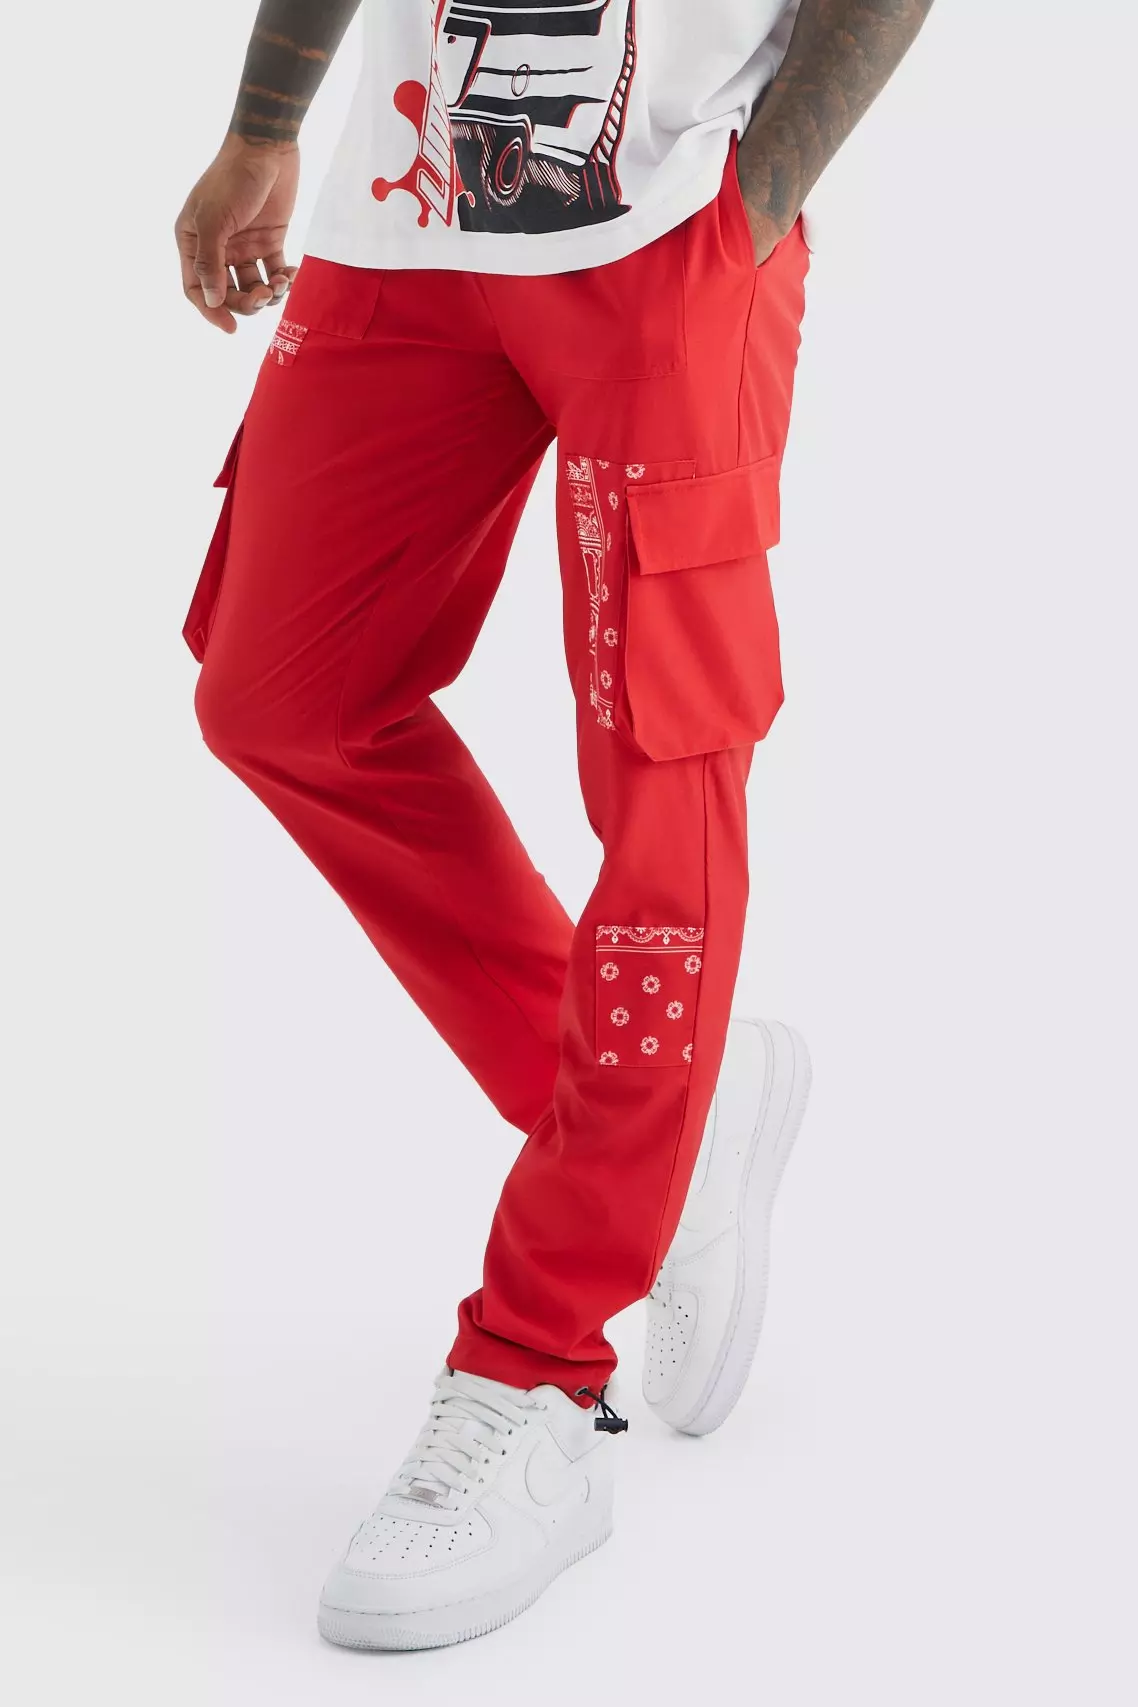 Red Slim Patched Bandana Multi Cargo Pants